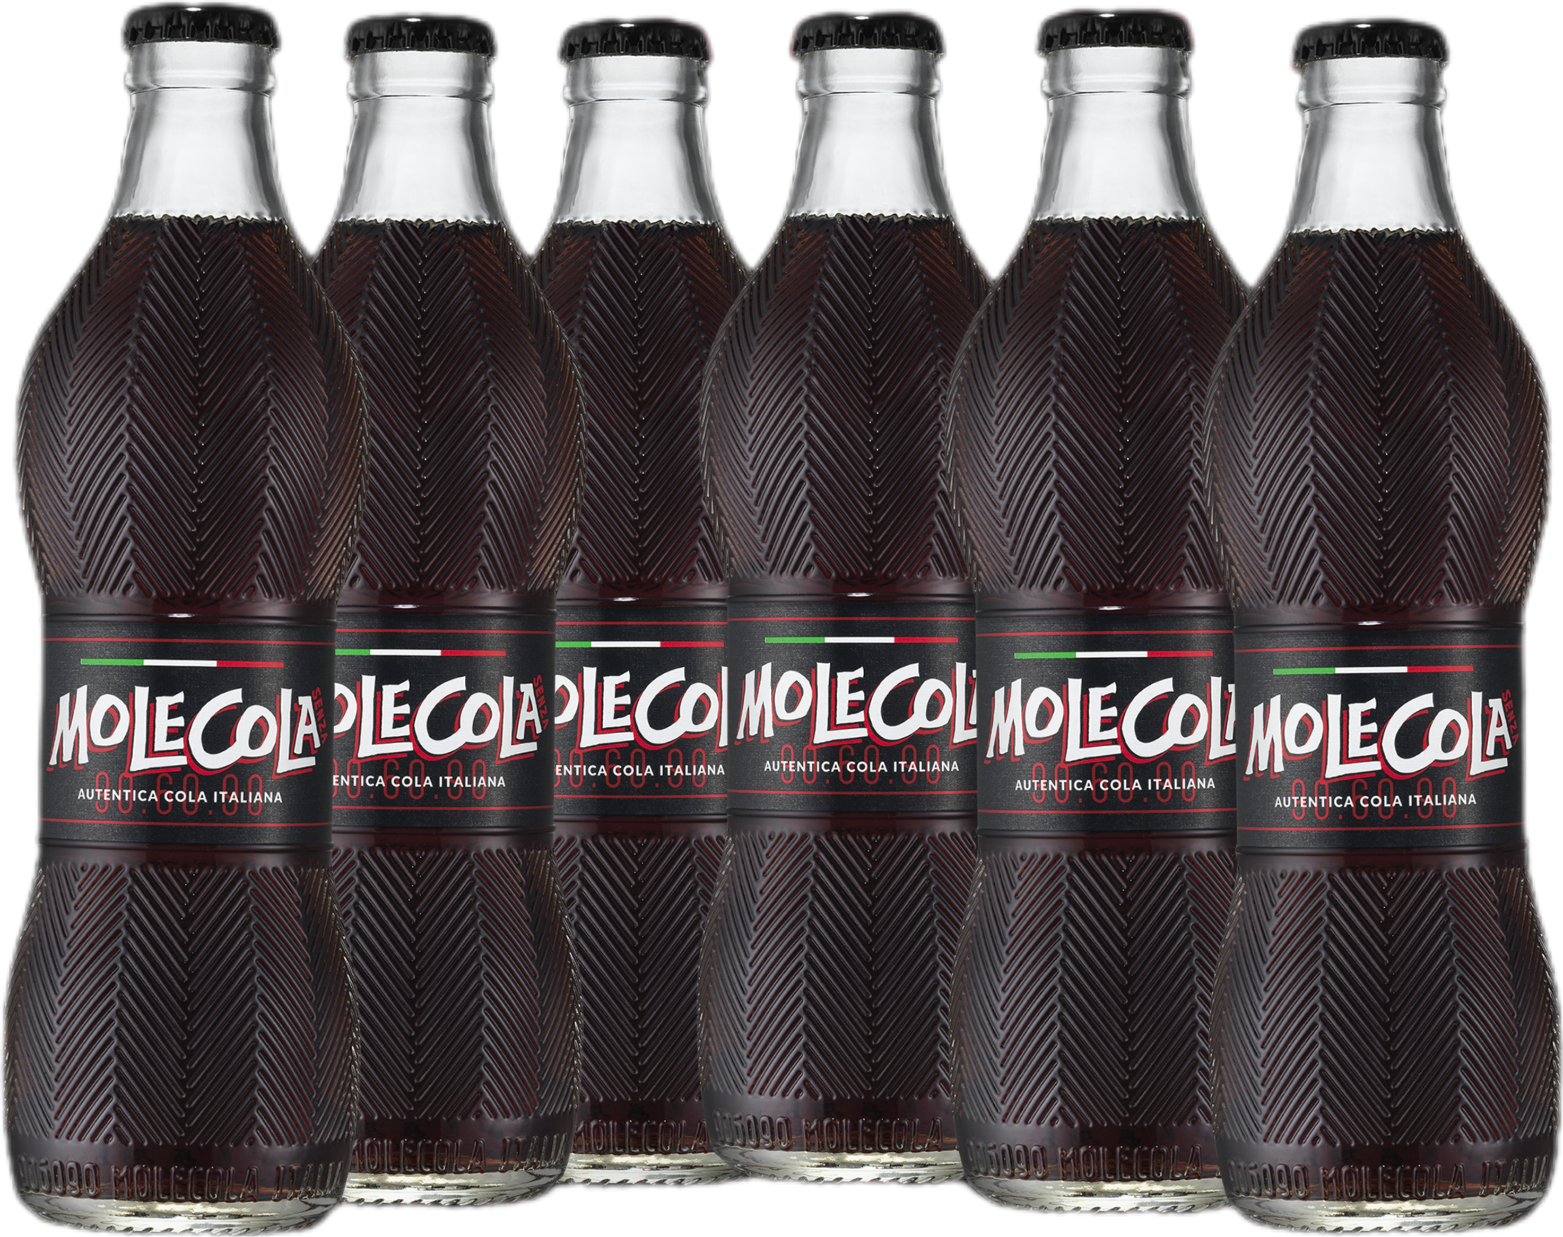 COLACAO Zero without added sugar 325g.